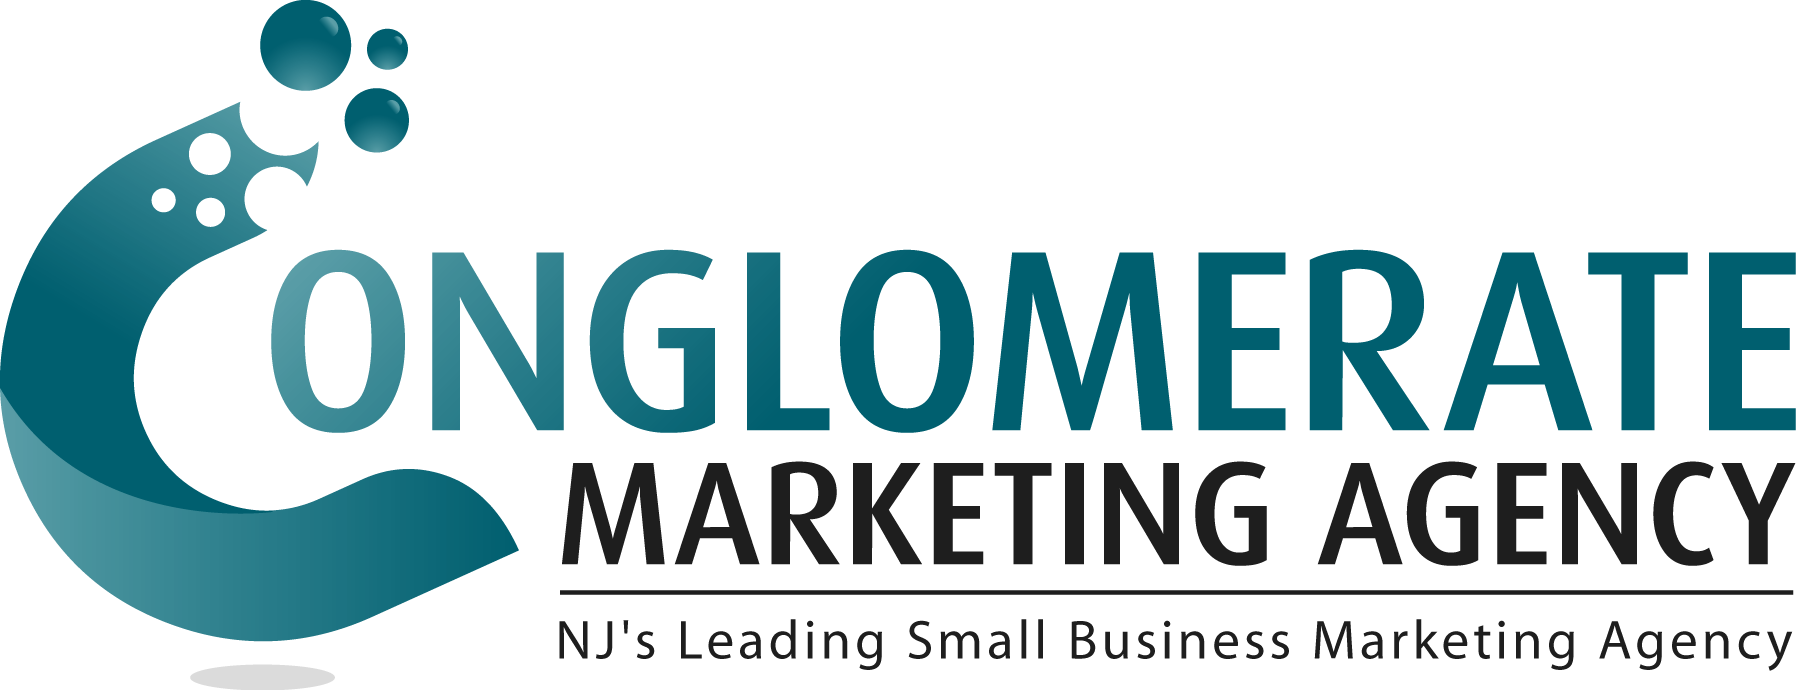 Conglomerate Marketing Agency